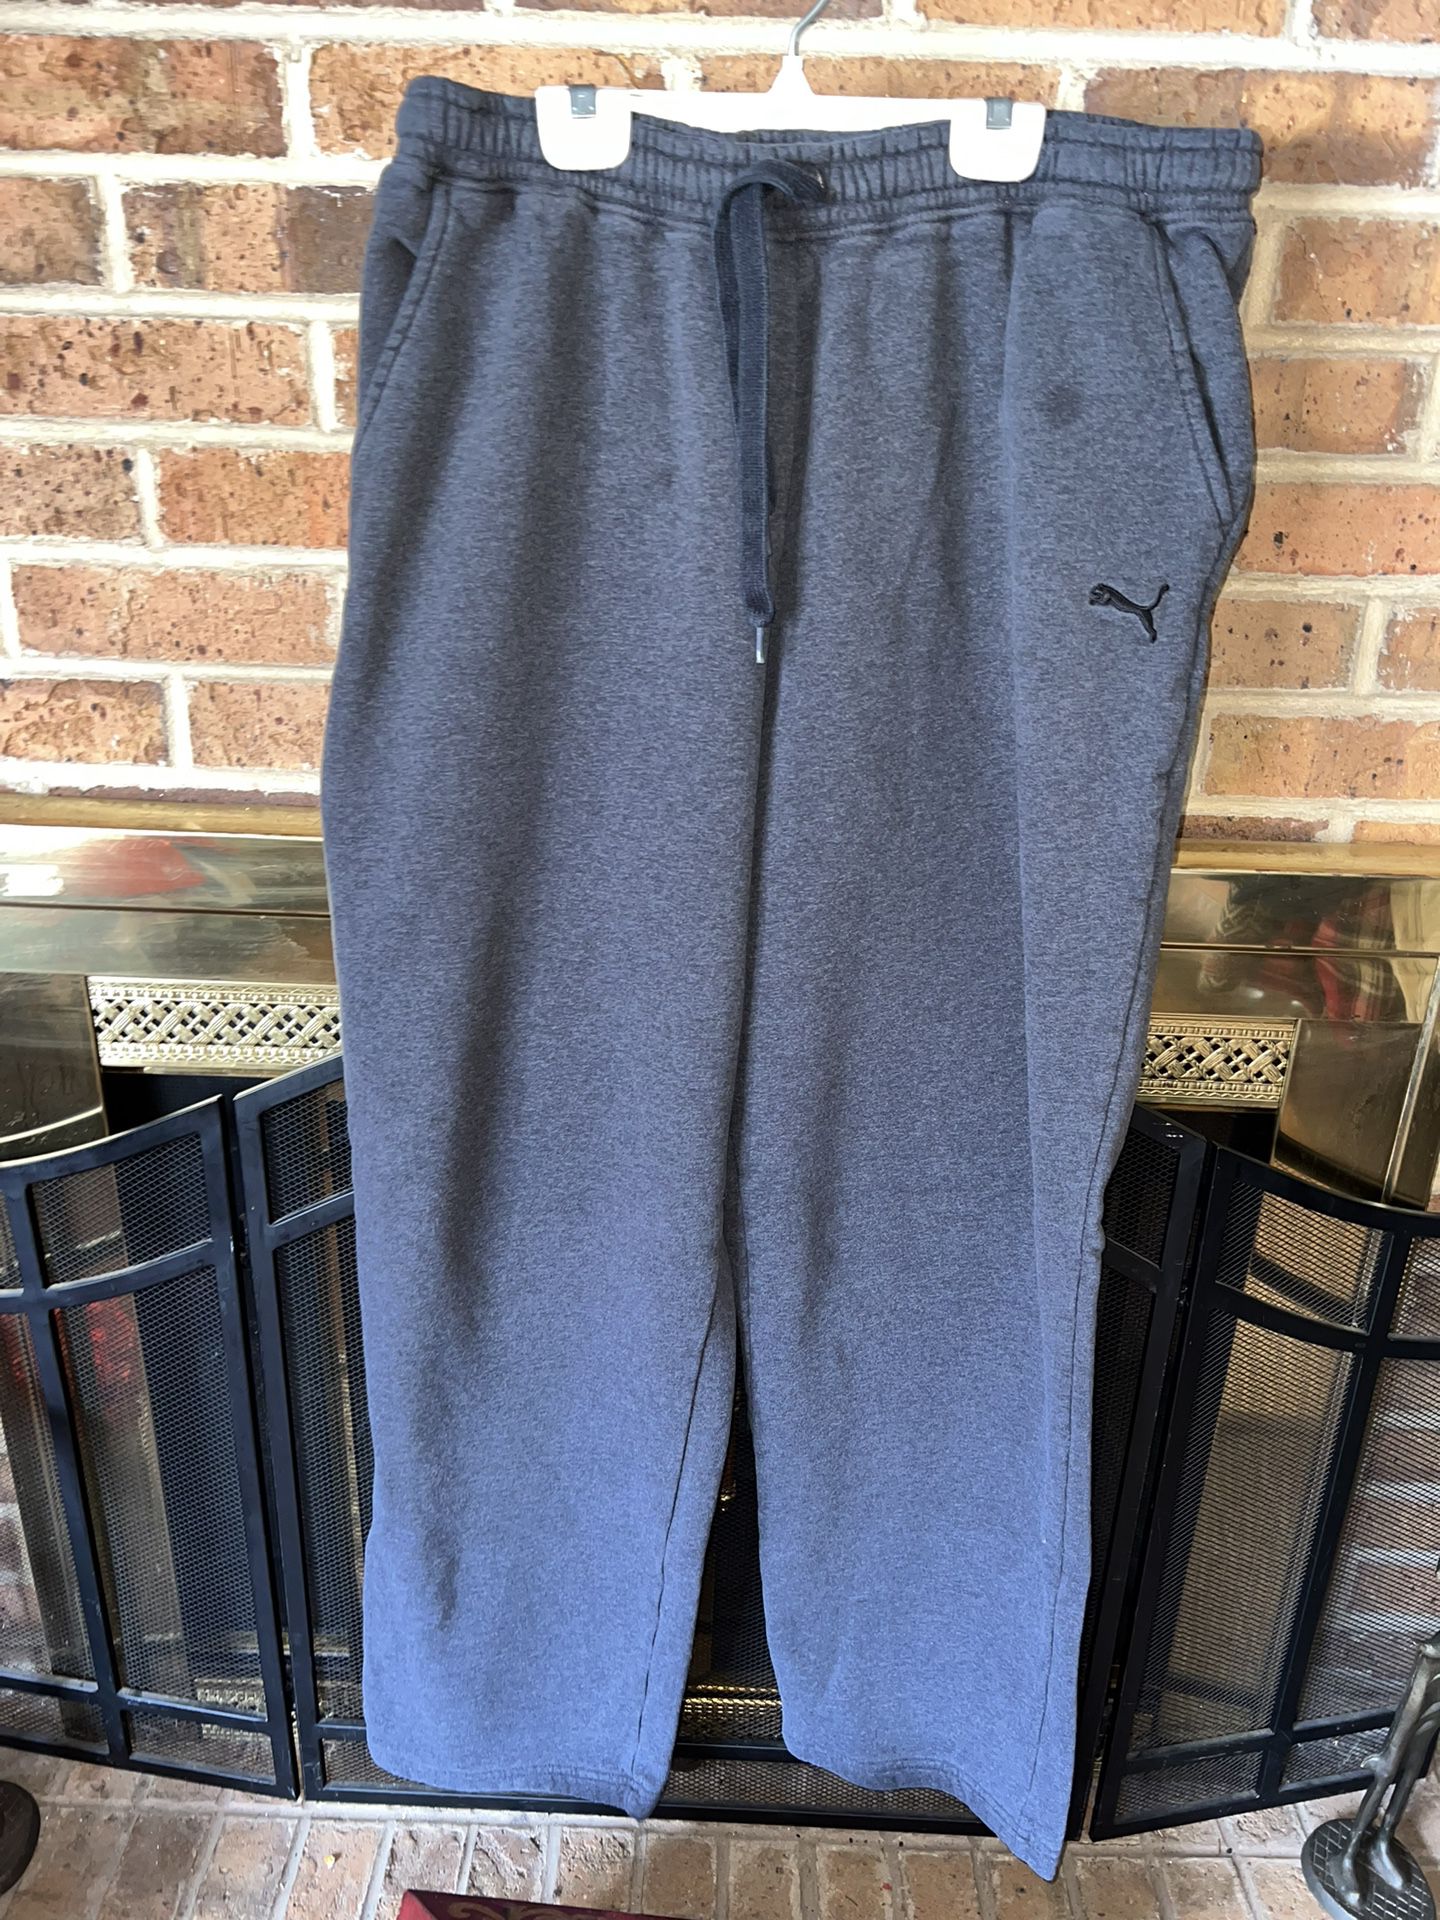 Mens Puma gray fleece sweatpants super cozy in size XL stain in the front